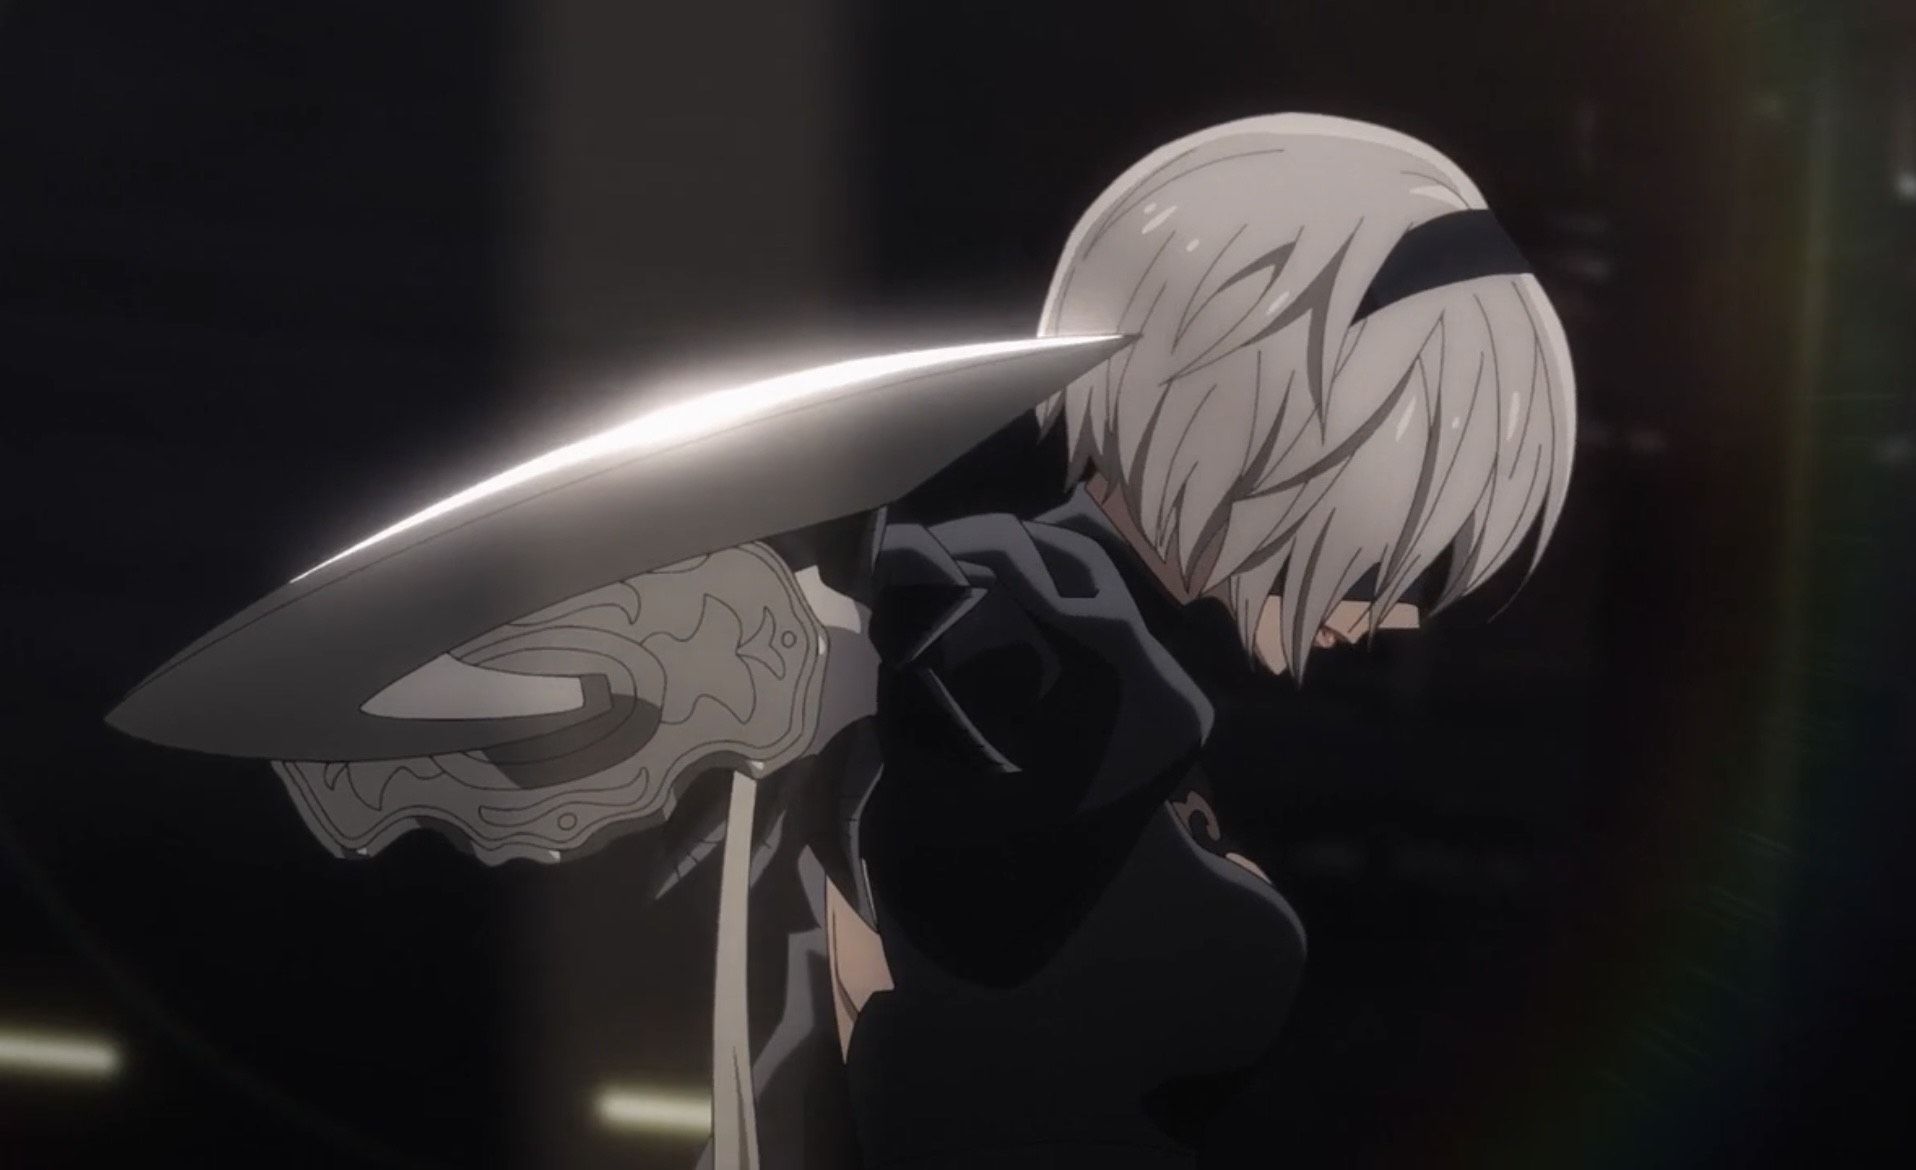 The broadcast of Nier Automata Anime Ver.1.1a has been temporarily  postponed